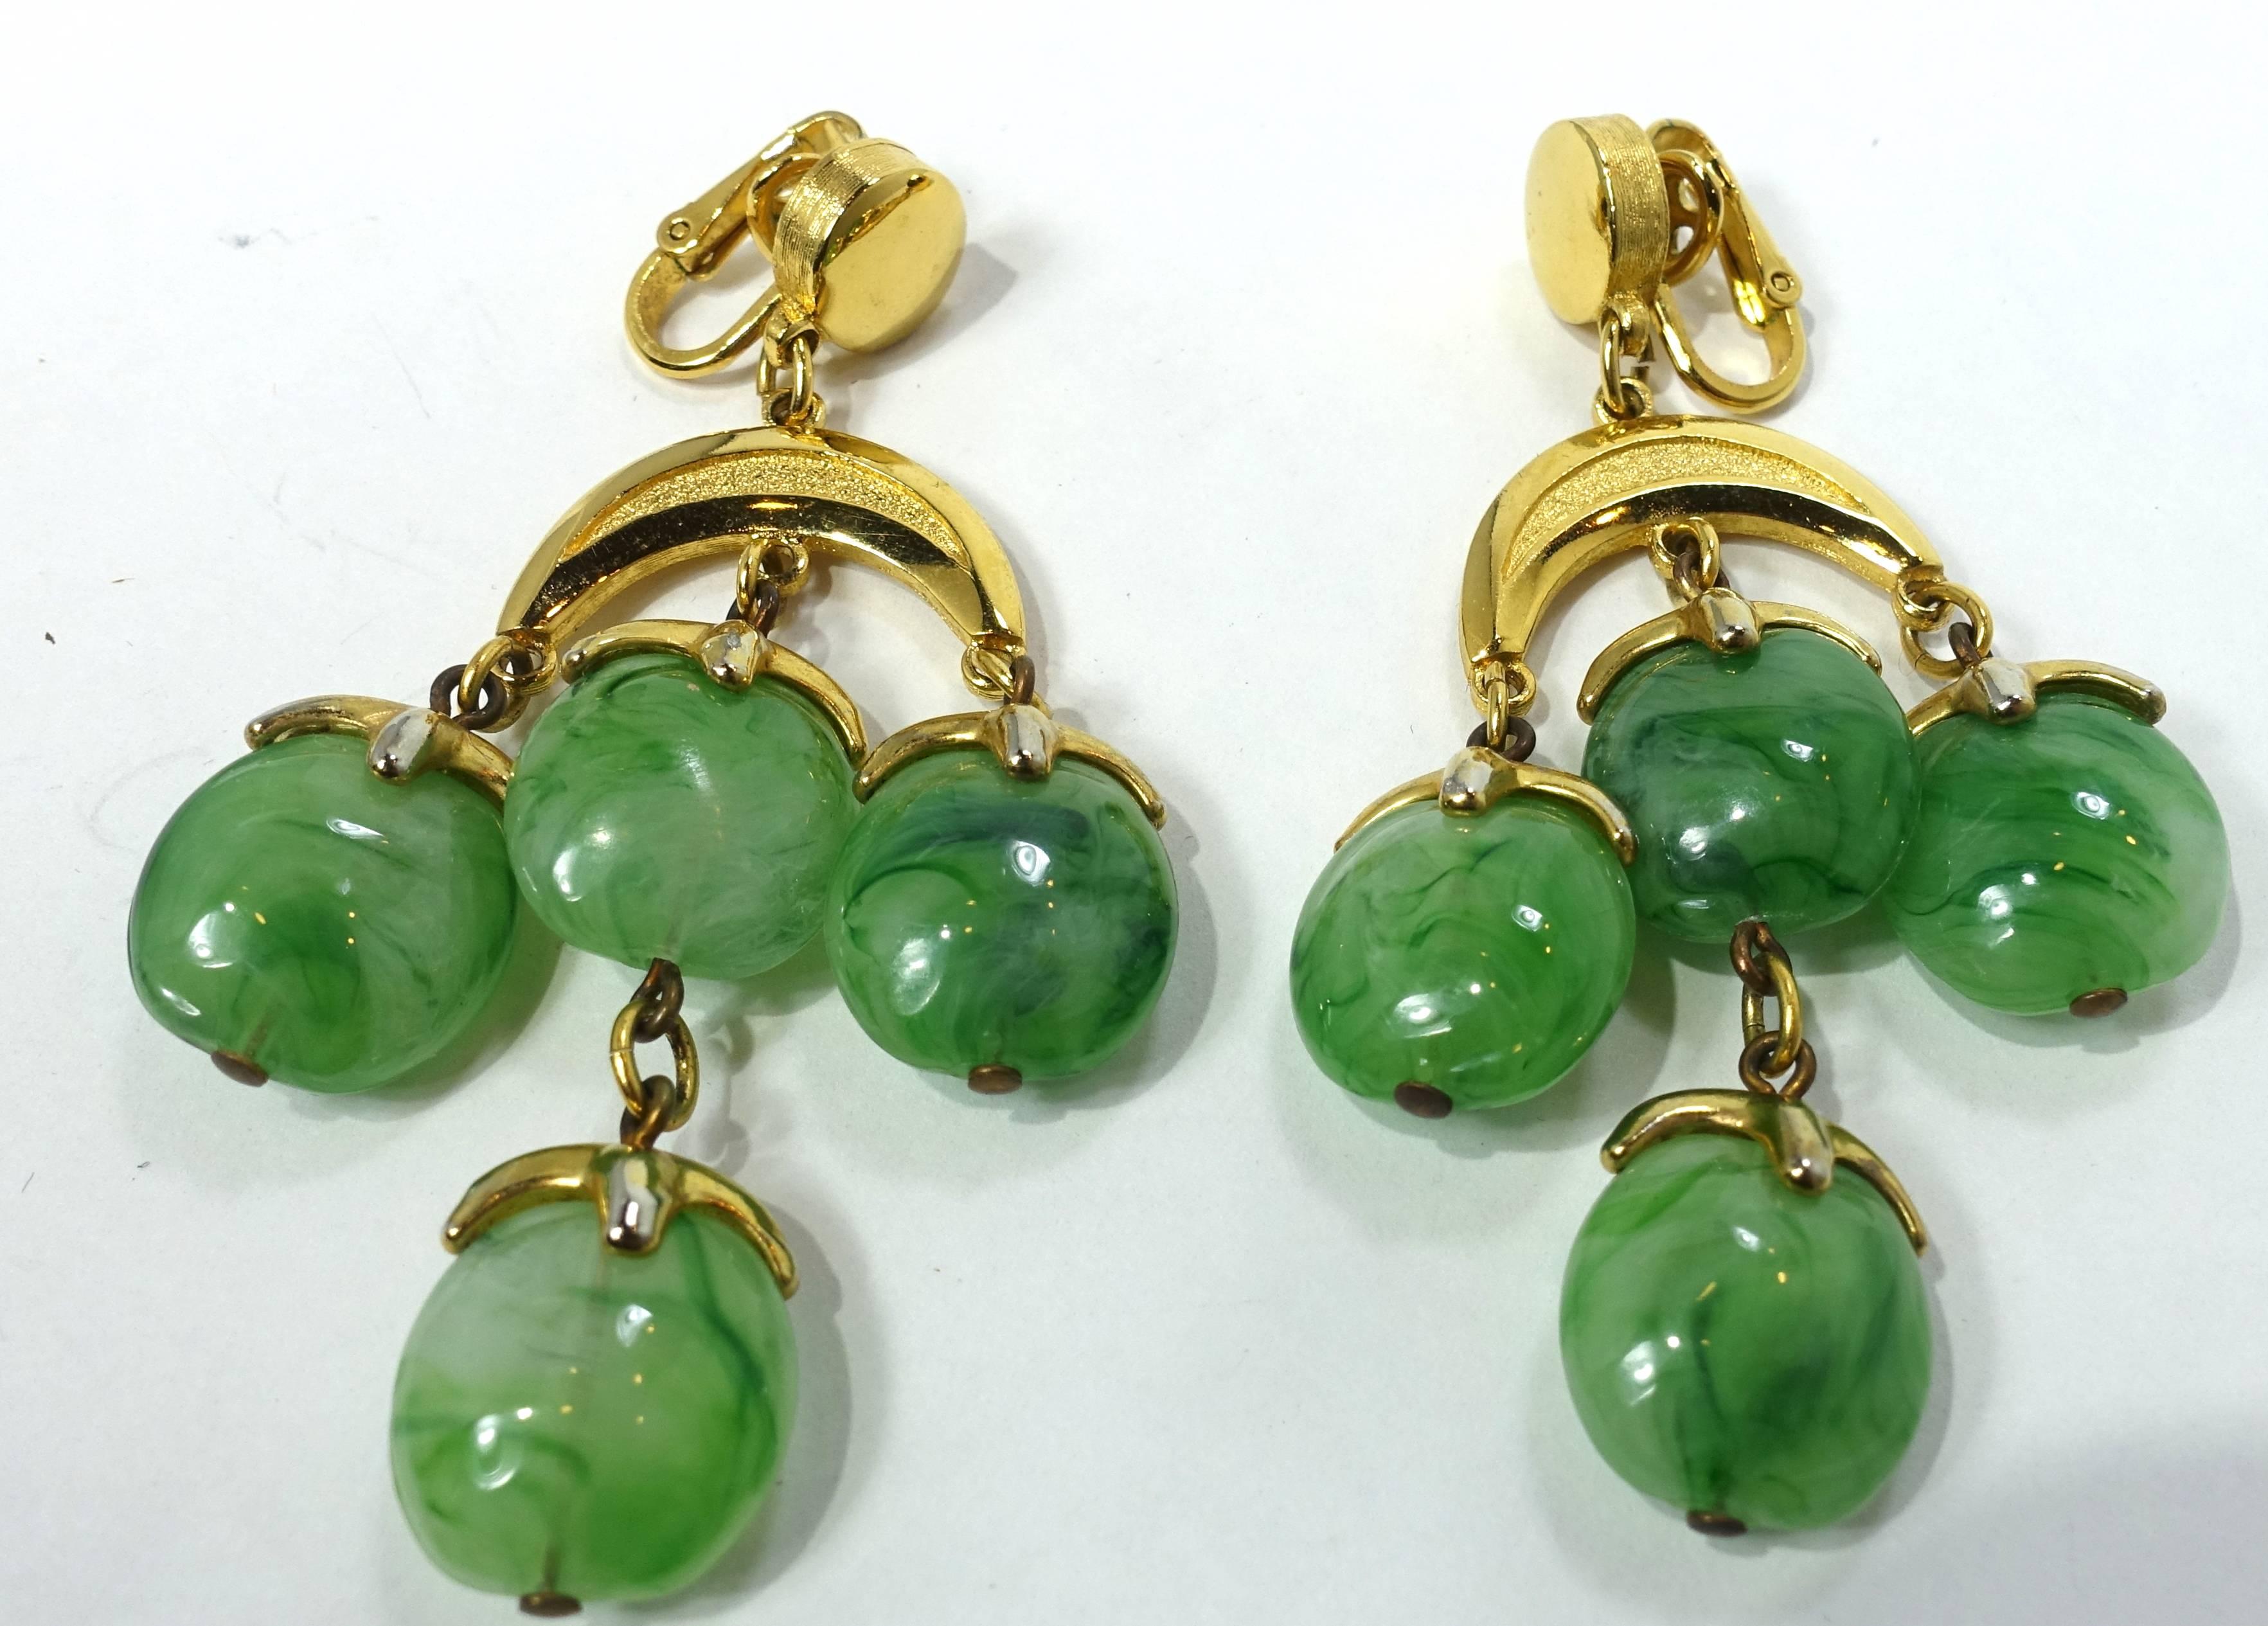 These vintage signed Trifari earrings have green marbled glass drops in a gold tone setting.  These clip earrings measure 3” x 1-1/2” and are signed “Trifari”. They are in excellent condition.